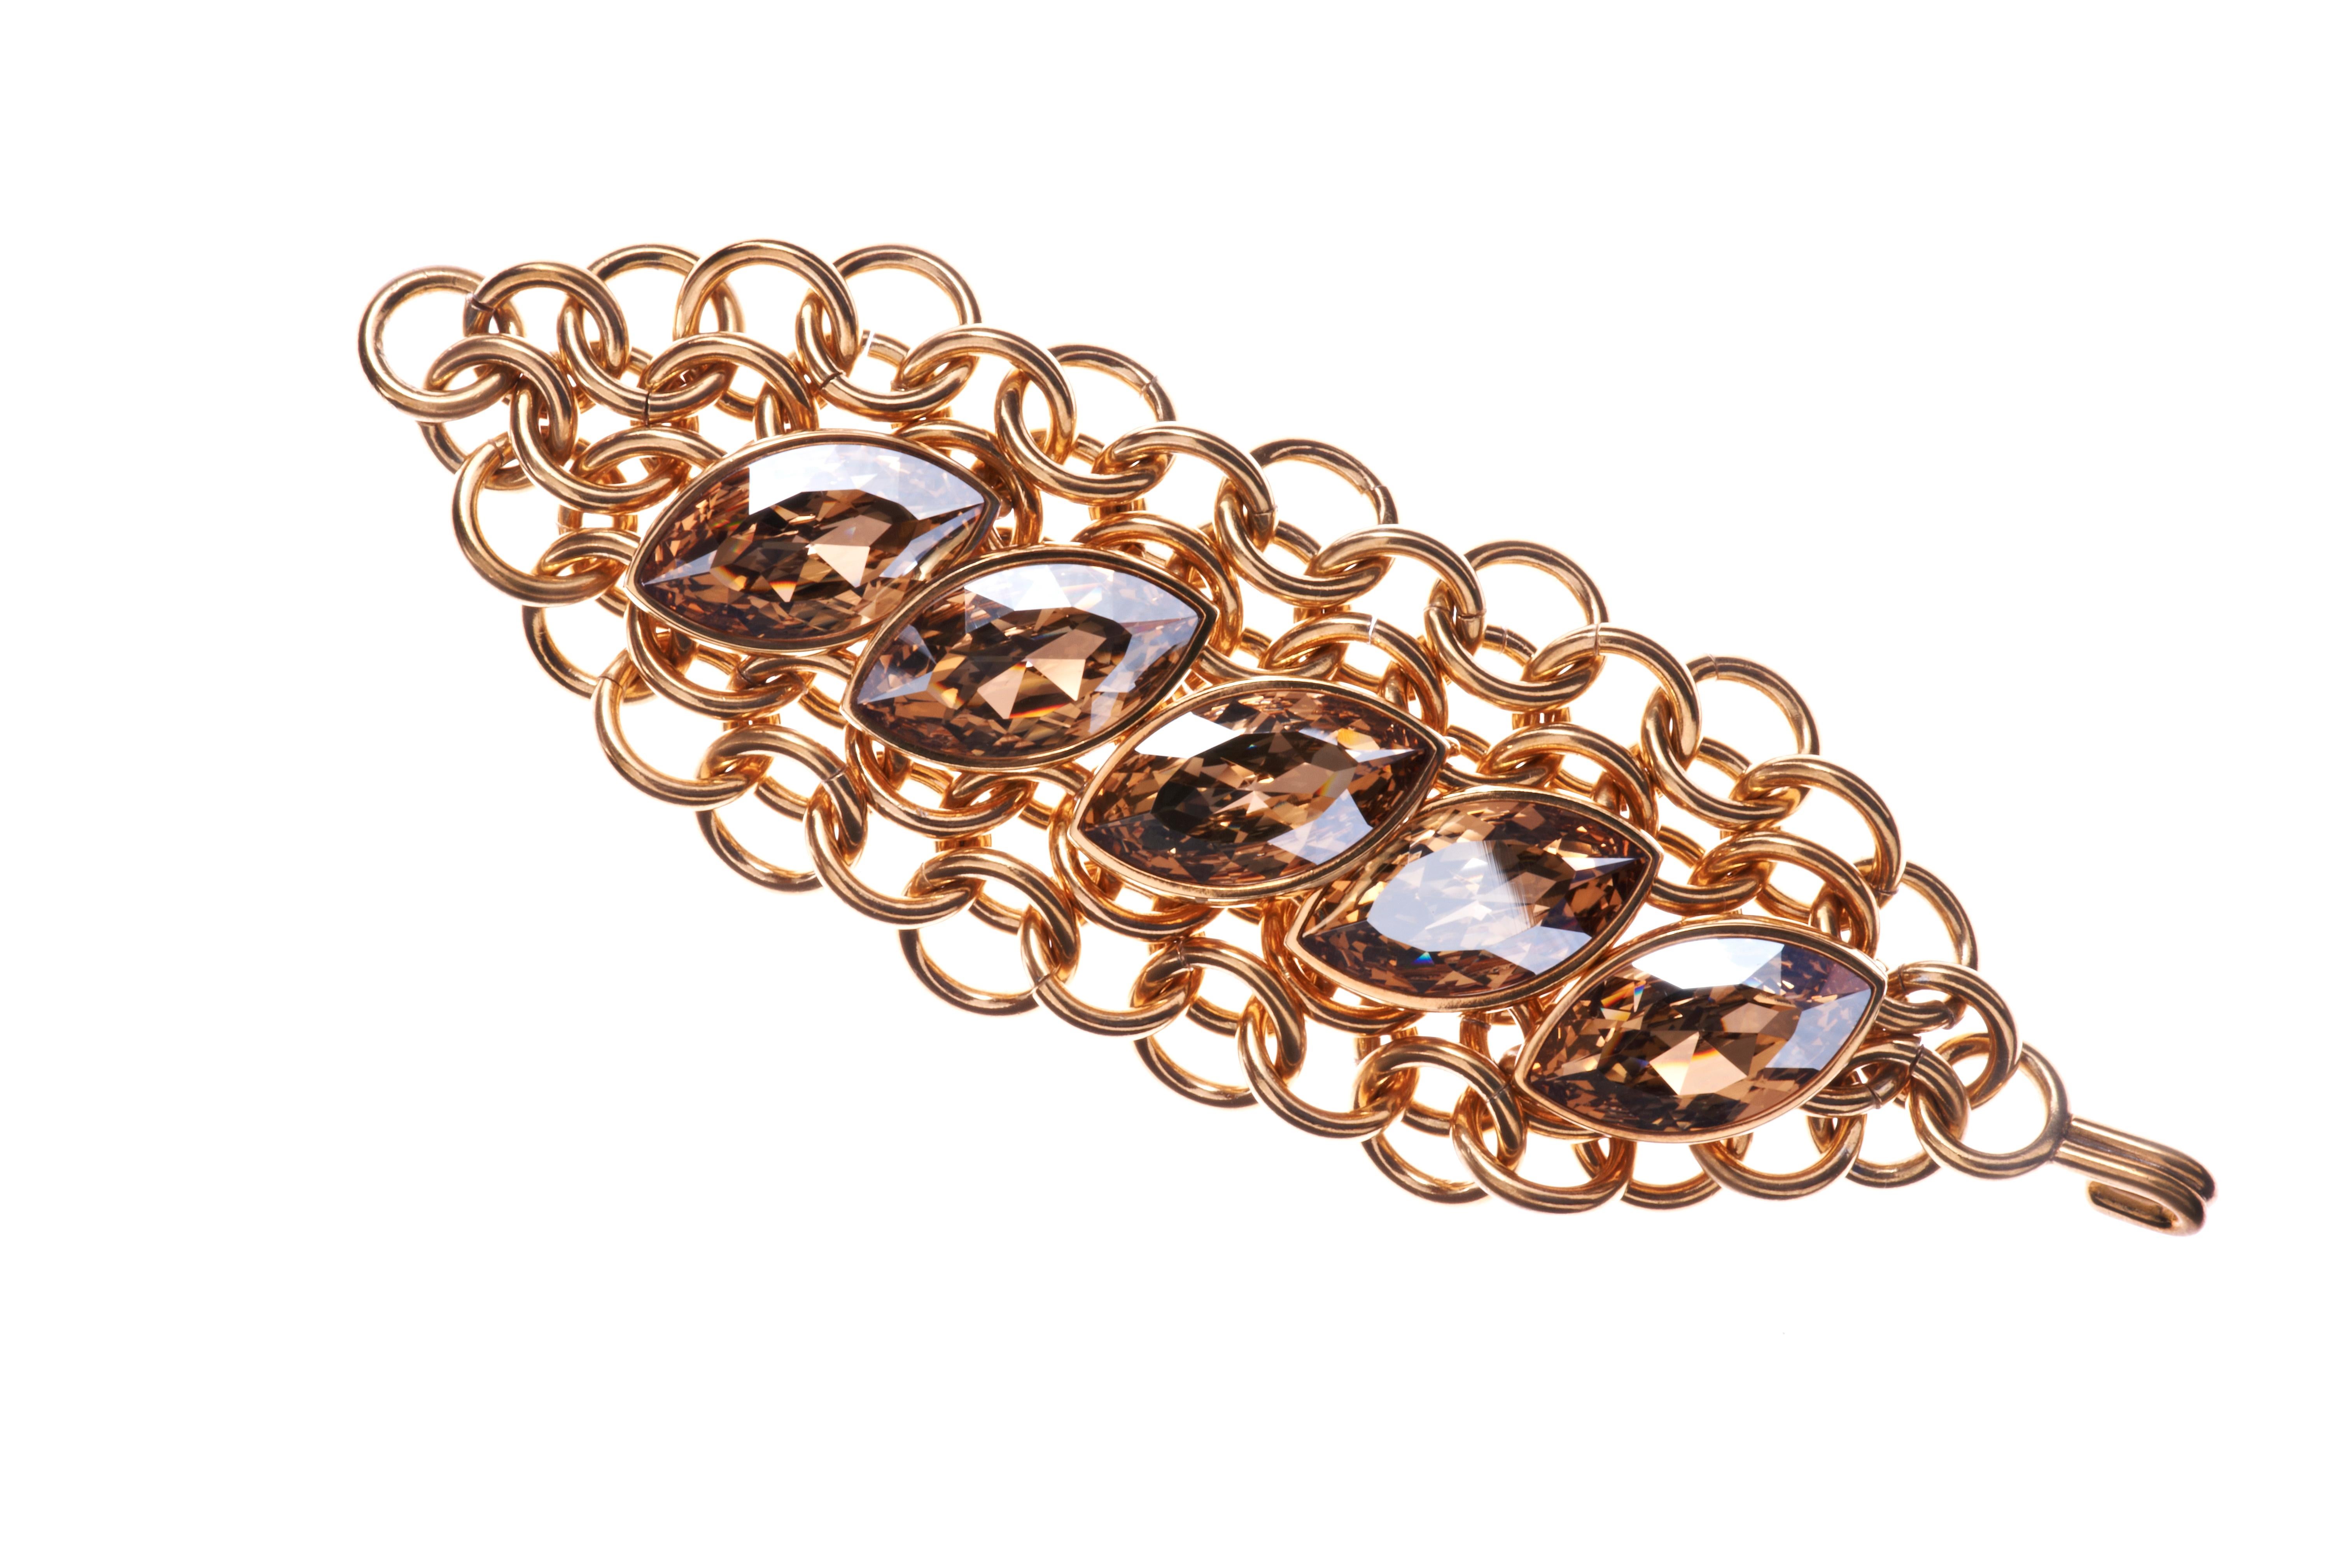 A dramatic fusion of handmade chainmail and Swarovski crystal creates a bold statement bracelet. The chainmail drapes and embraces the wrist perfectly, working well with denim to duchesse silk. The bracelet is finished in 24 carat gold with